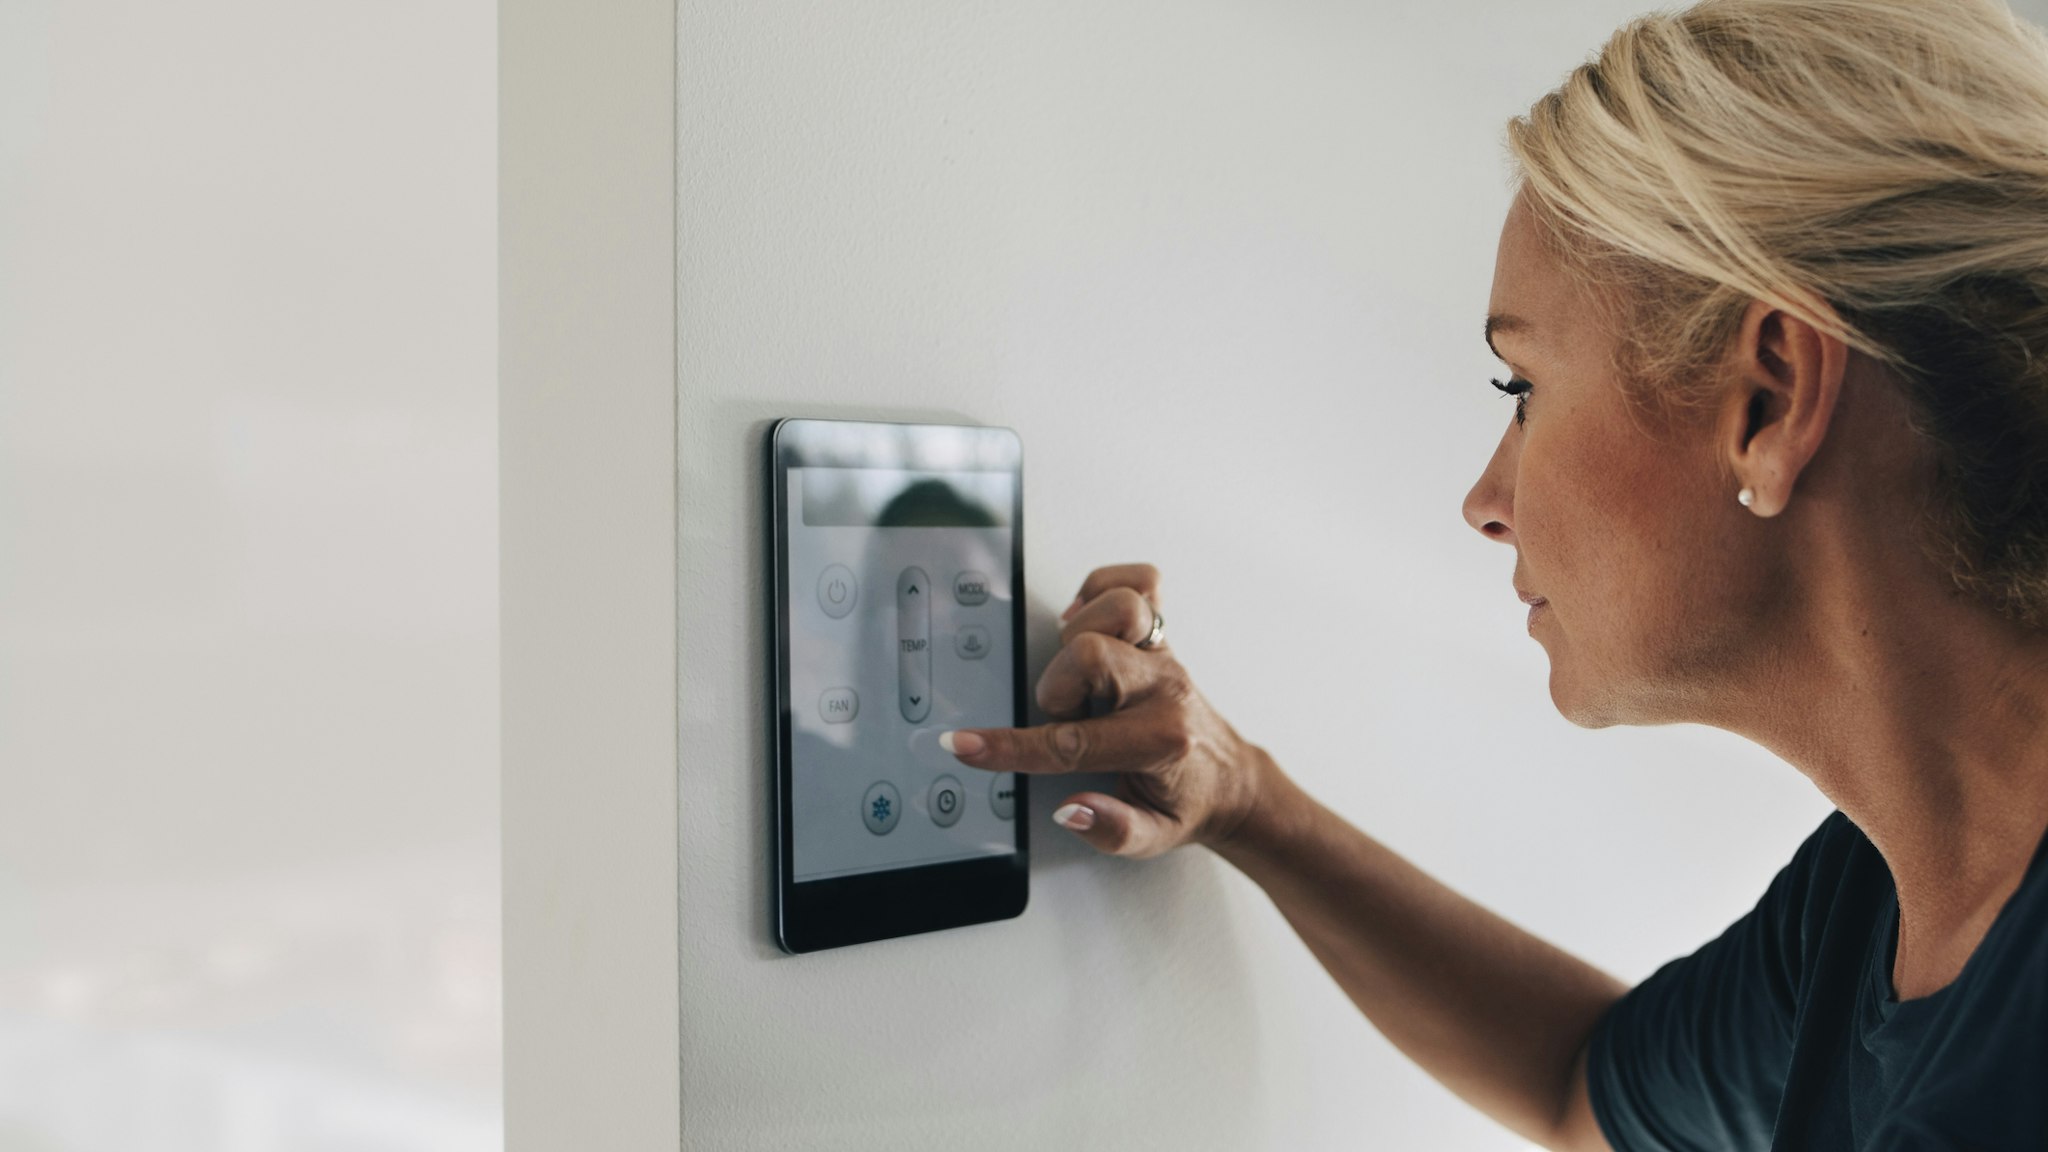 Blond woman adjusting thermostat using digital tablet mounted on white wall at home - stock photo